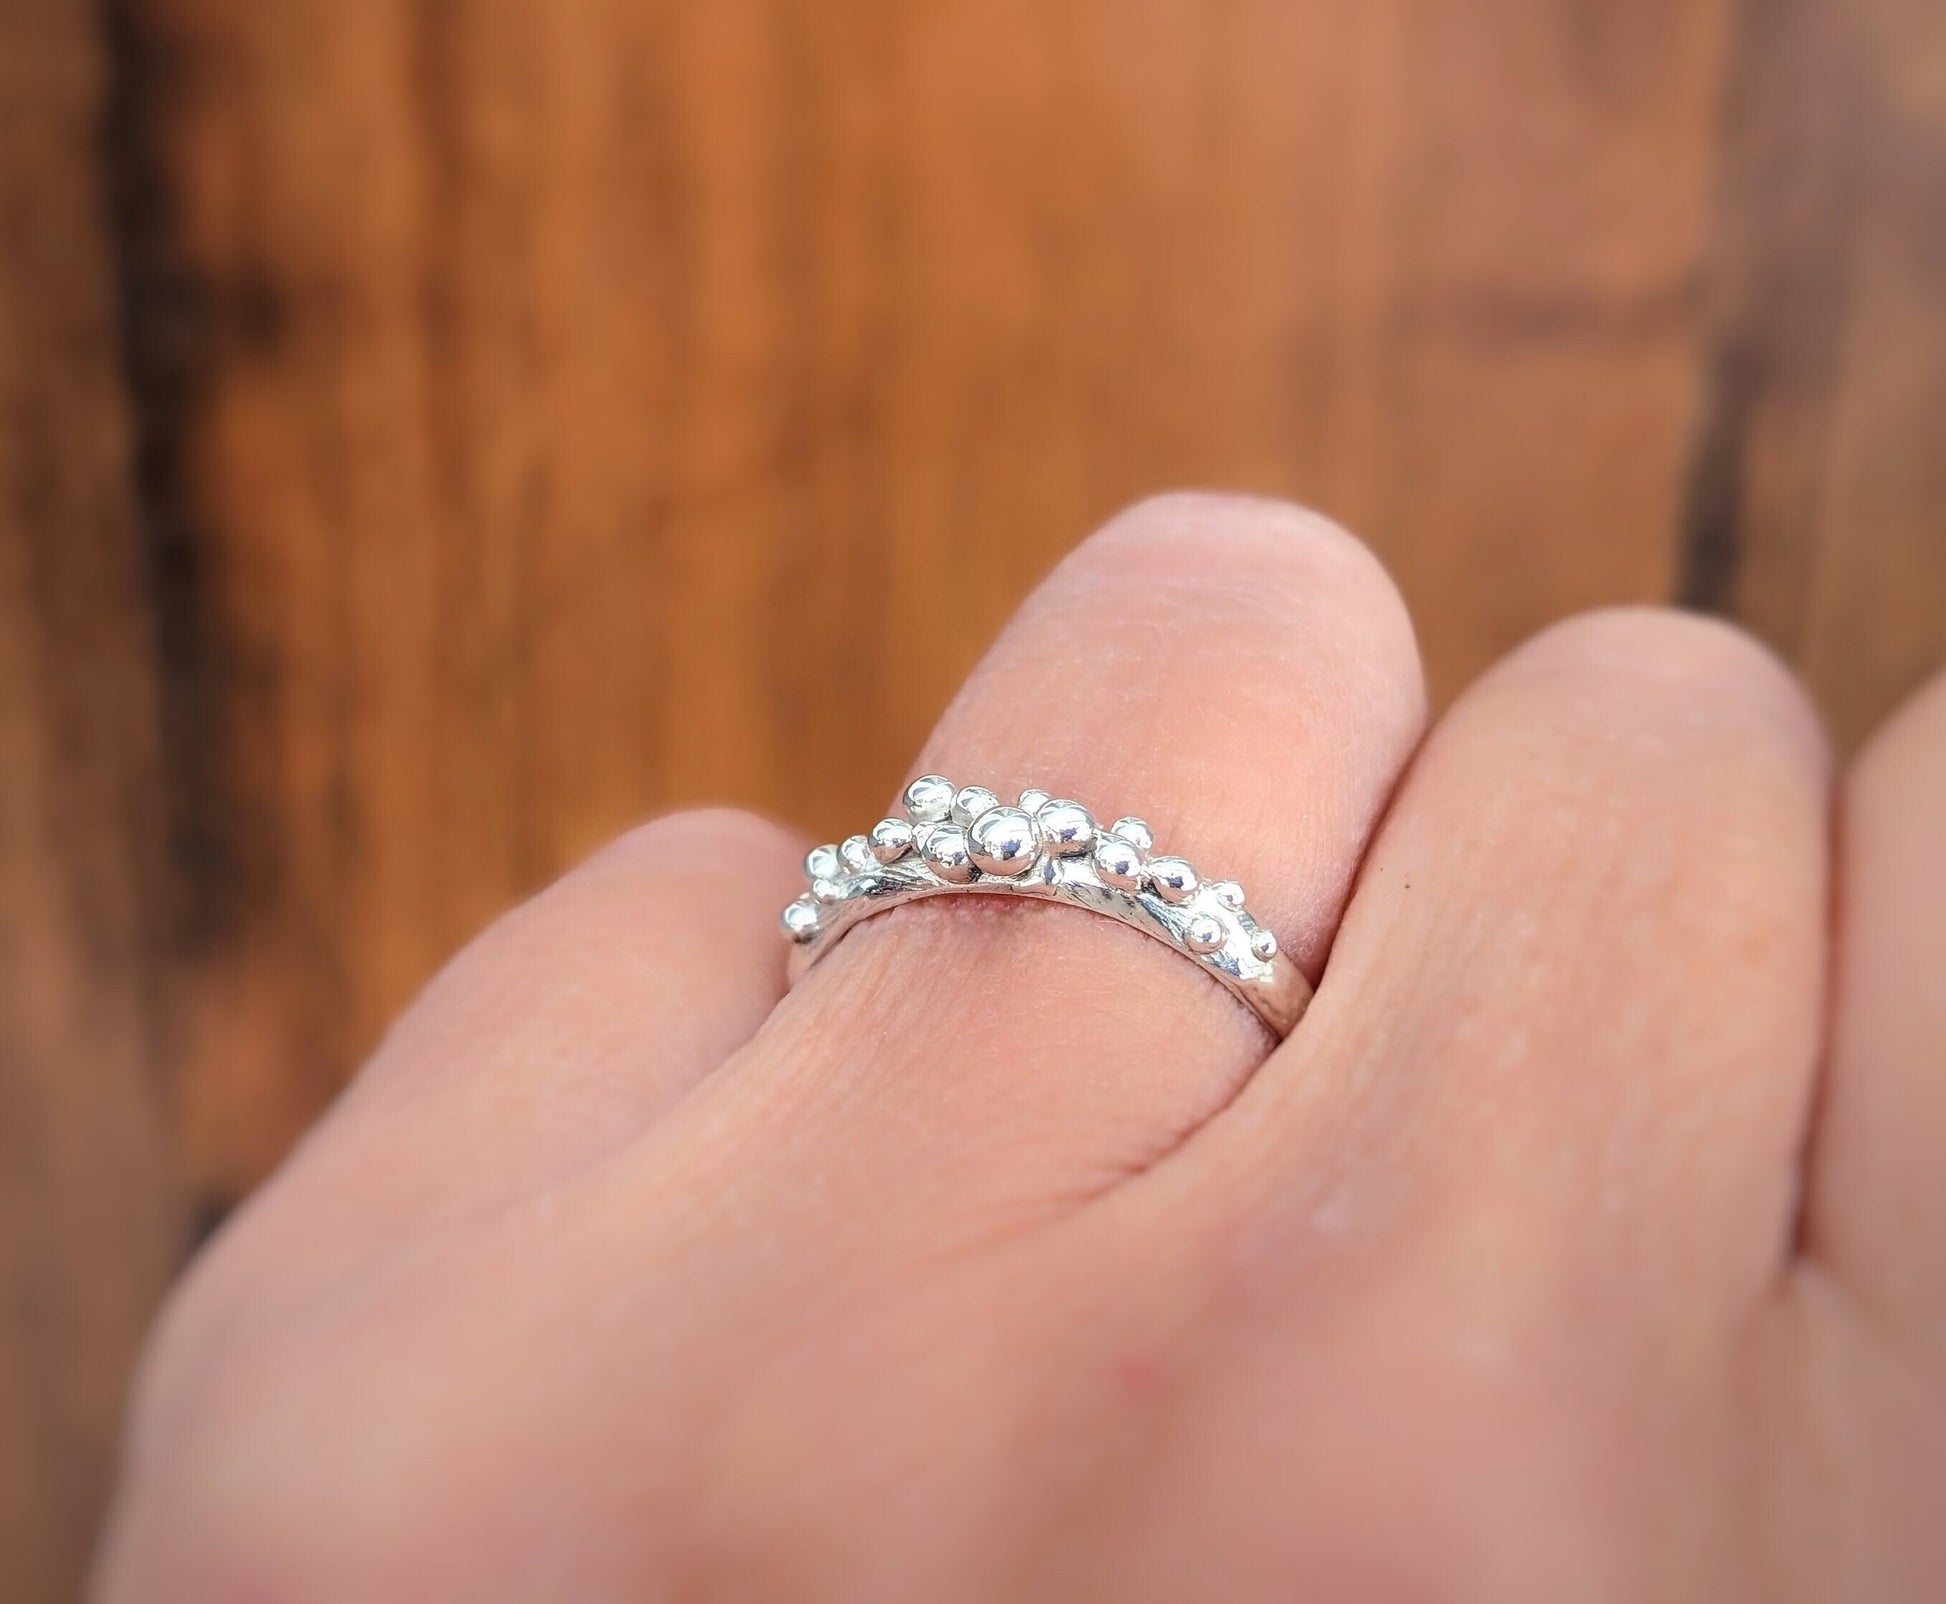 Woman's hand wearing a Molten Solid Sterling Silver granulated textured ring